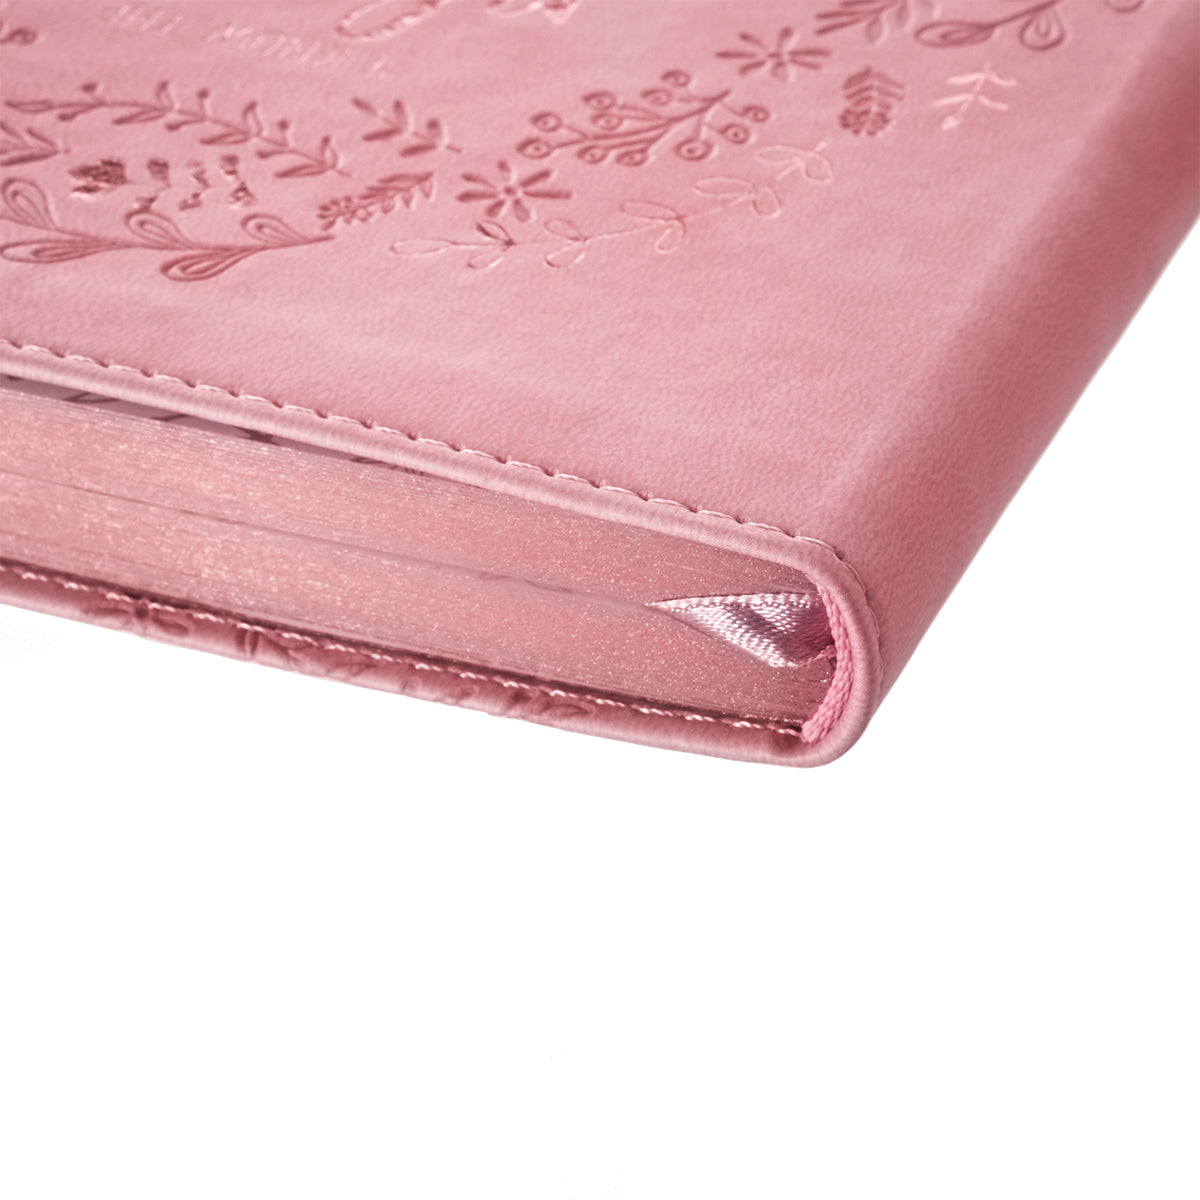 Image of I Know the Plans Slimline LuxLeather Journal in Pink other